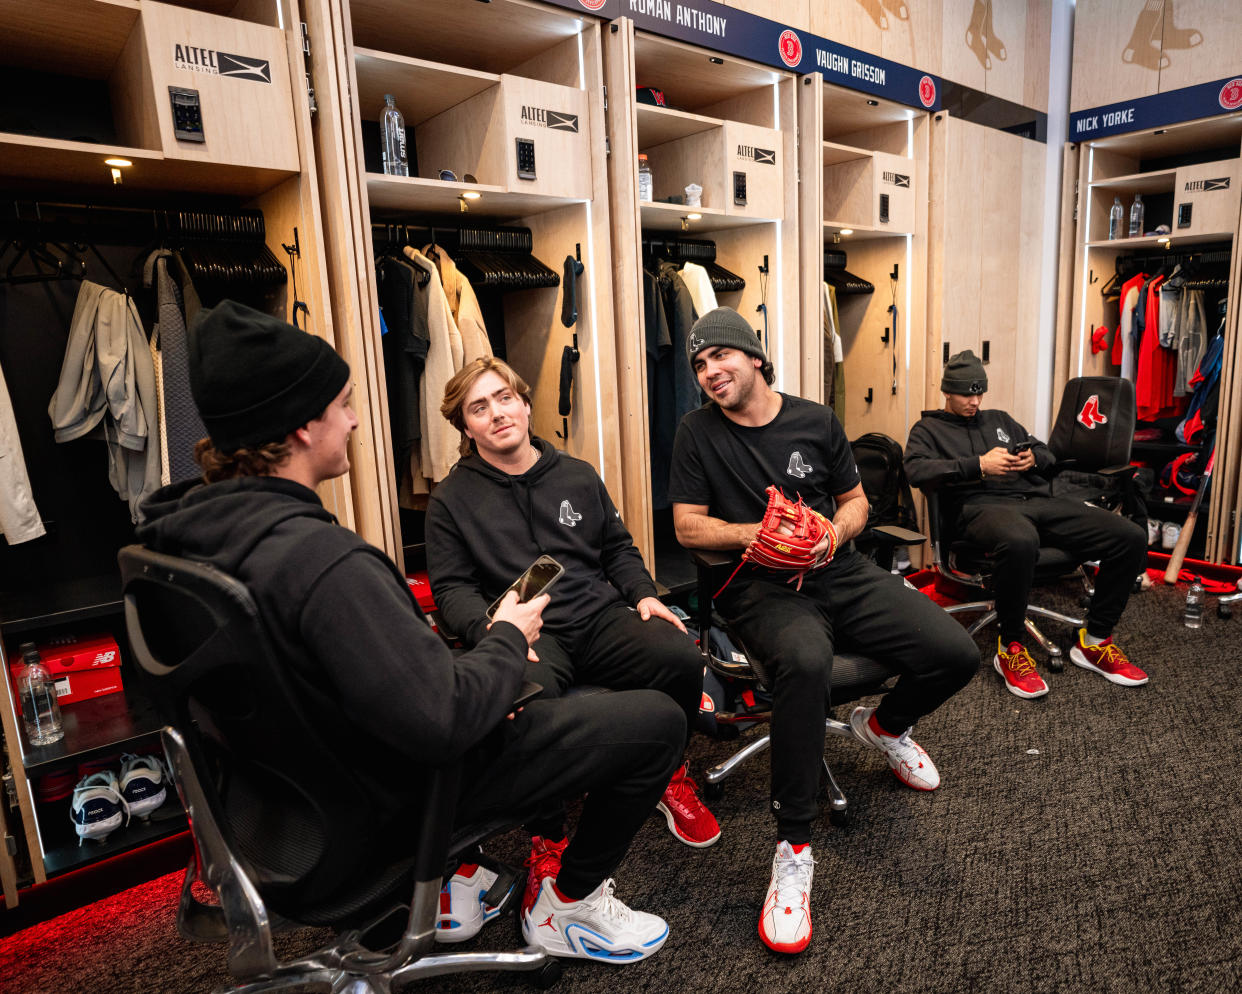 A few of the Boston Red Sox's top prospects, from left, Roman Anthony, Nathan Hickey and Marcelo Mayer talk inside the Red Sox clubhouse at Fenway Park as part of the Red Sox Development Program in mid-January.